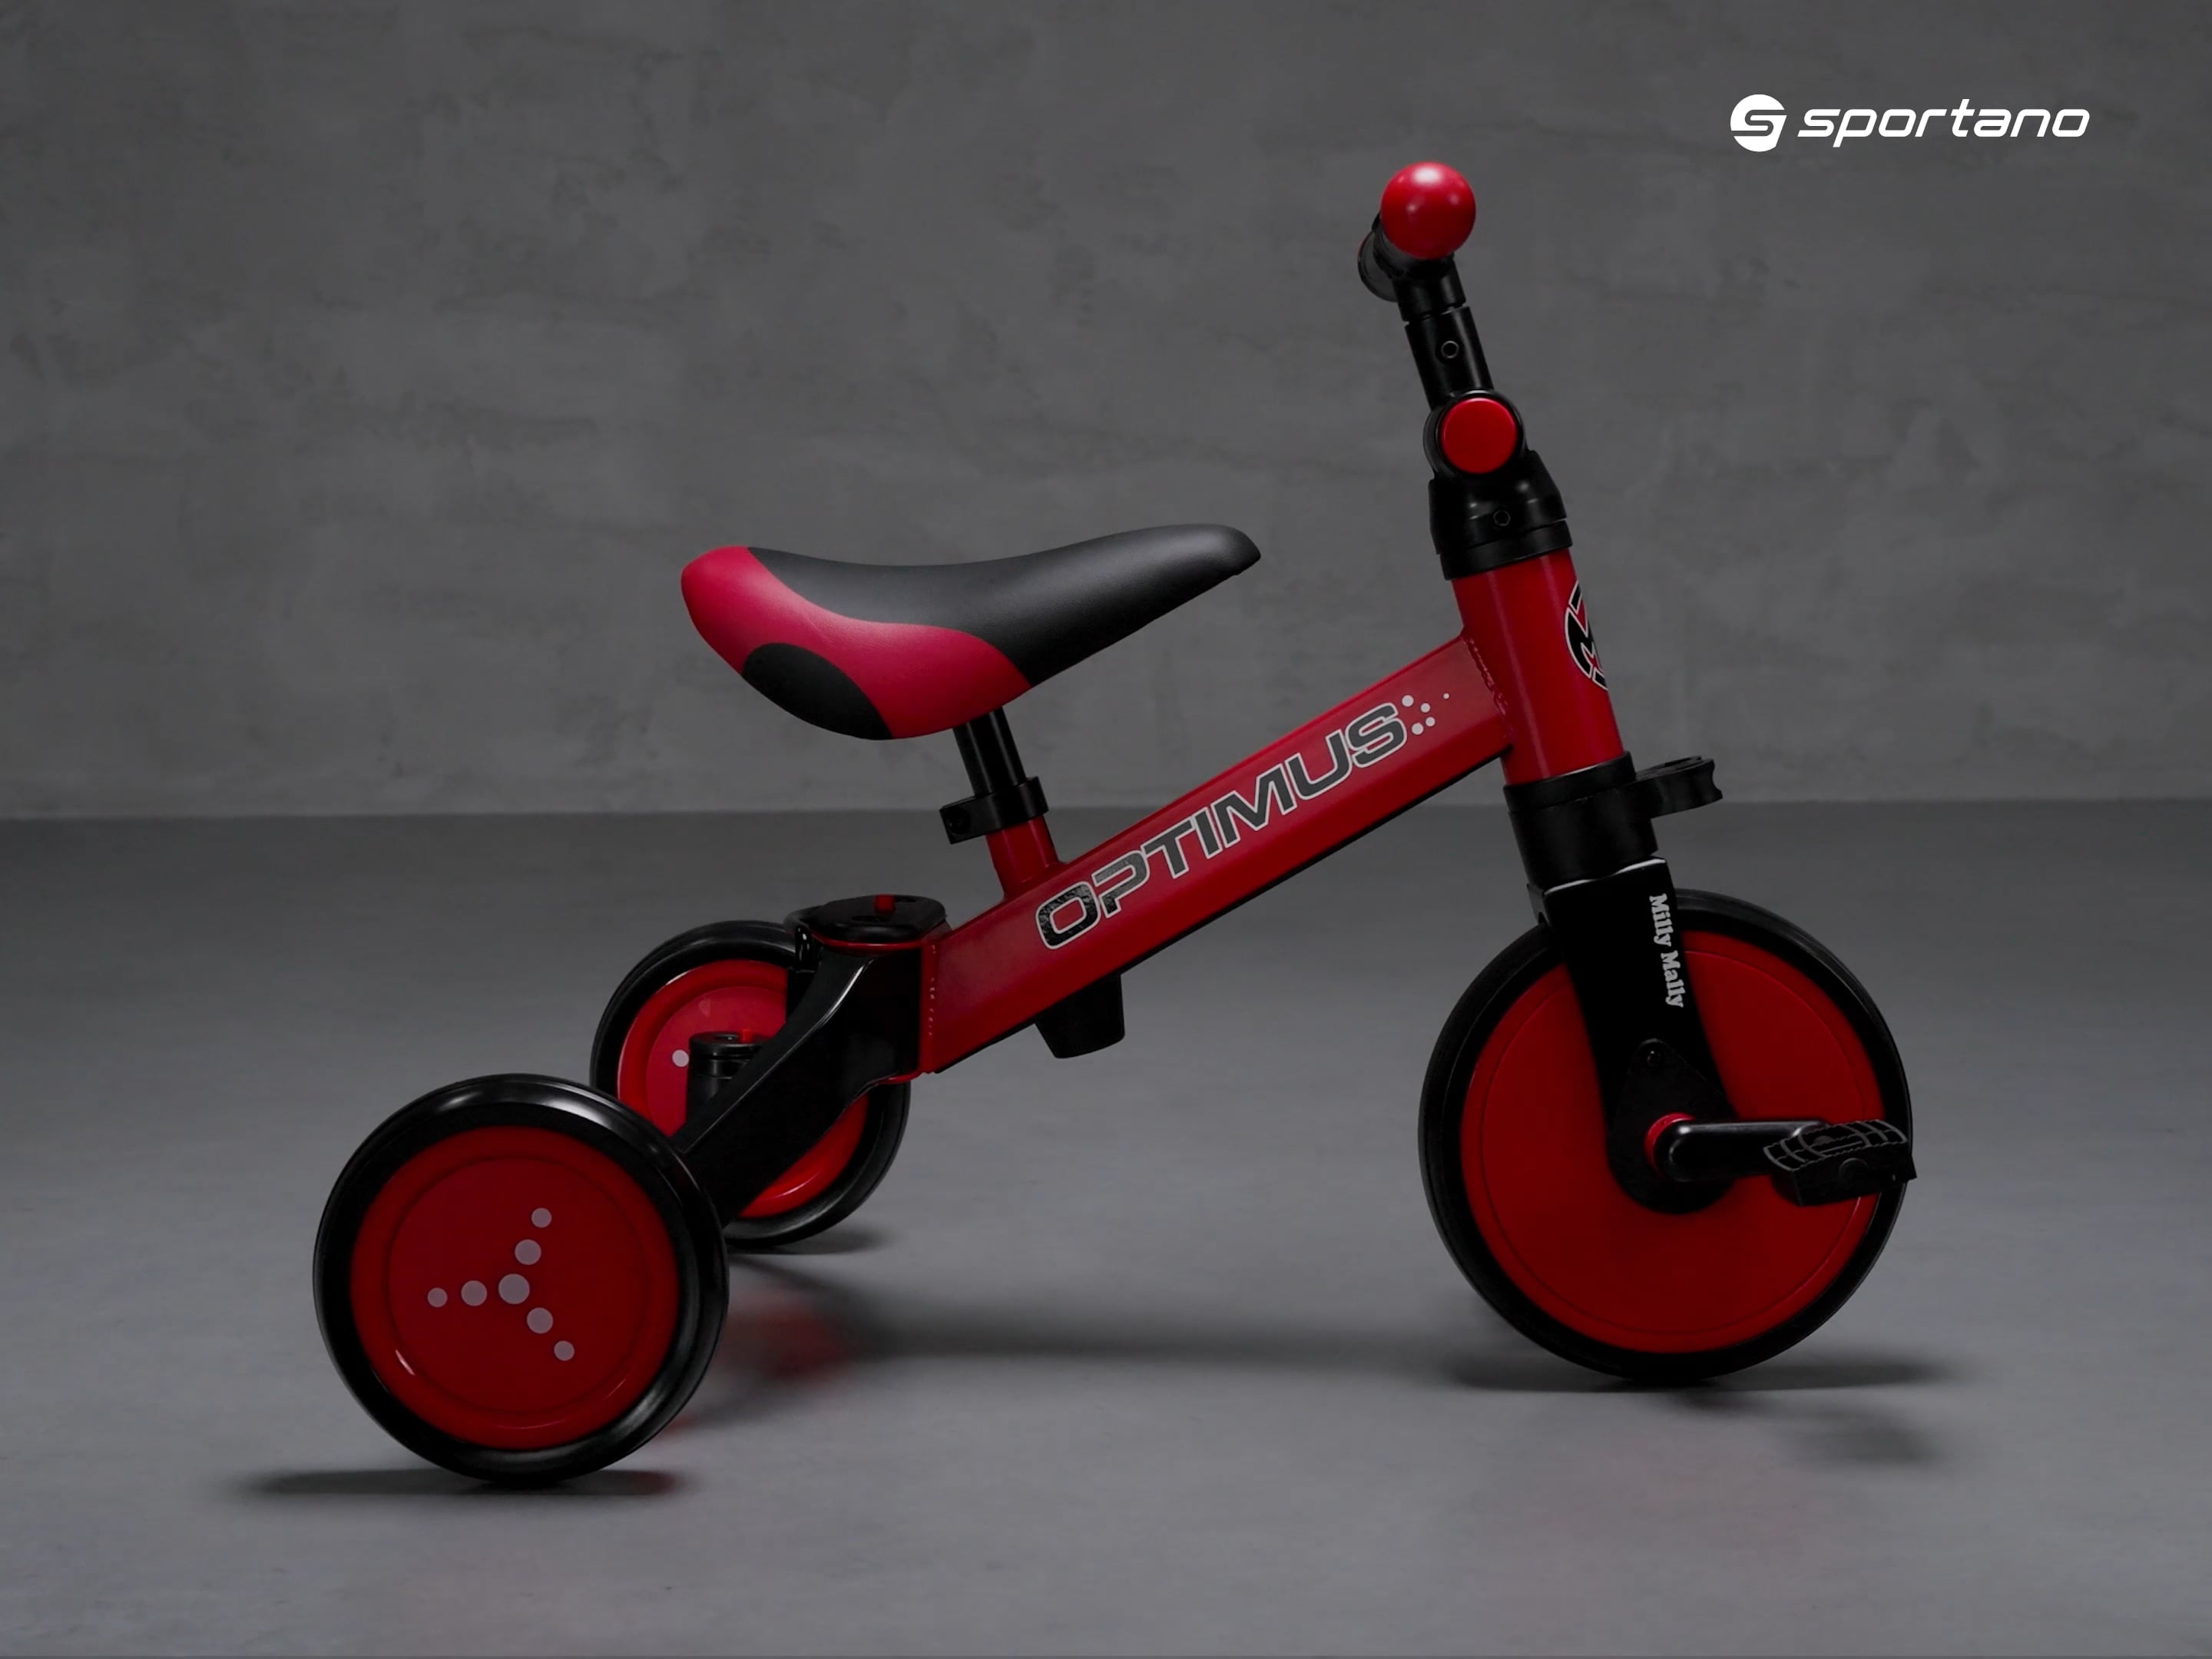 Milly Mally 3-in-1 cross-country tricycle Optimus red 2712